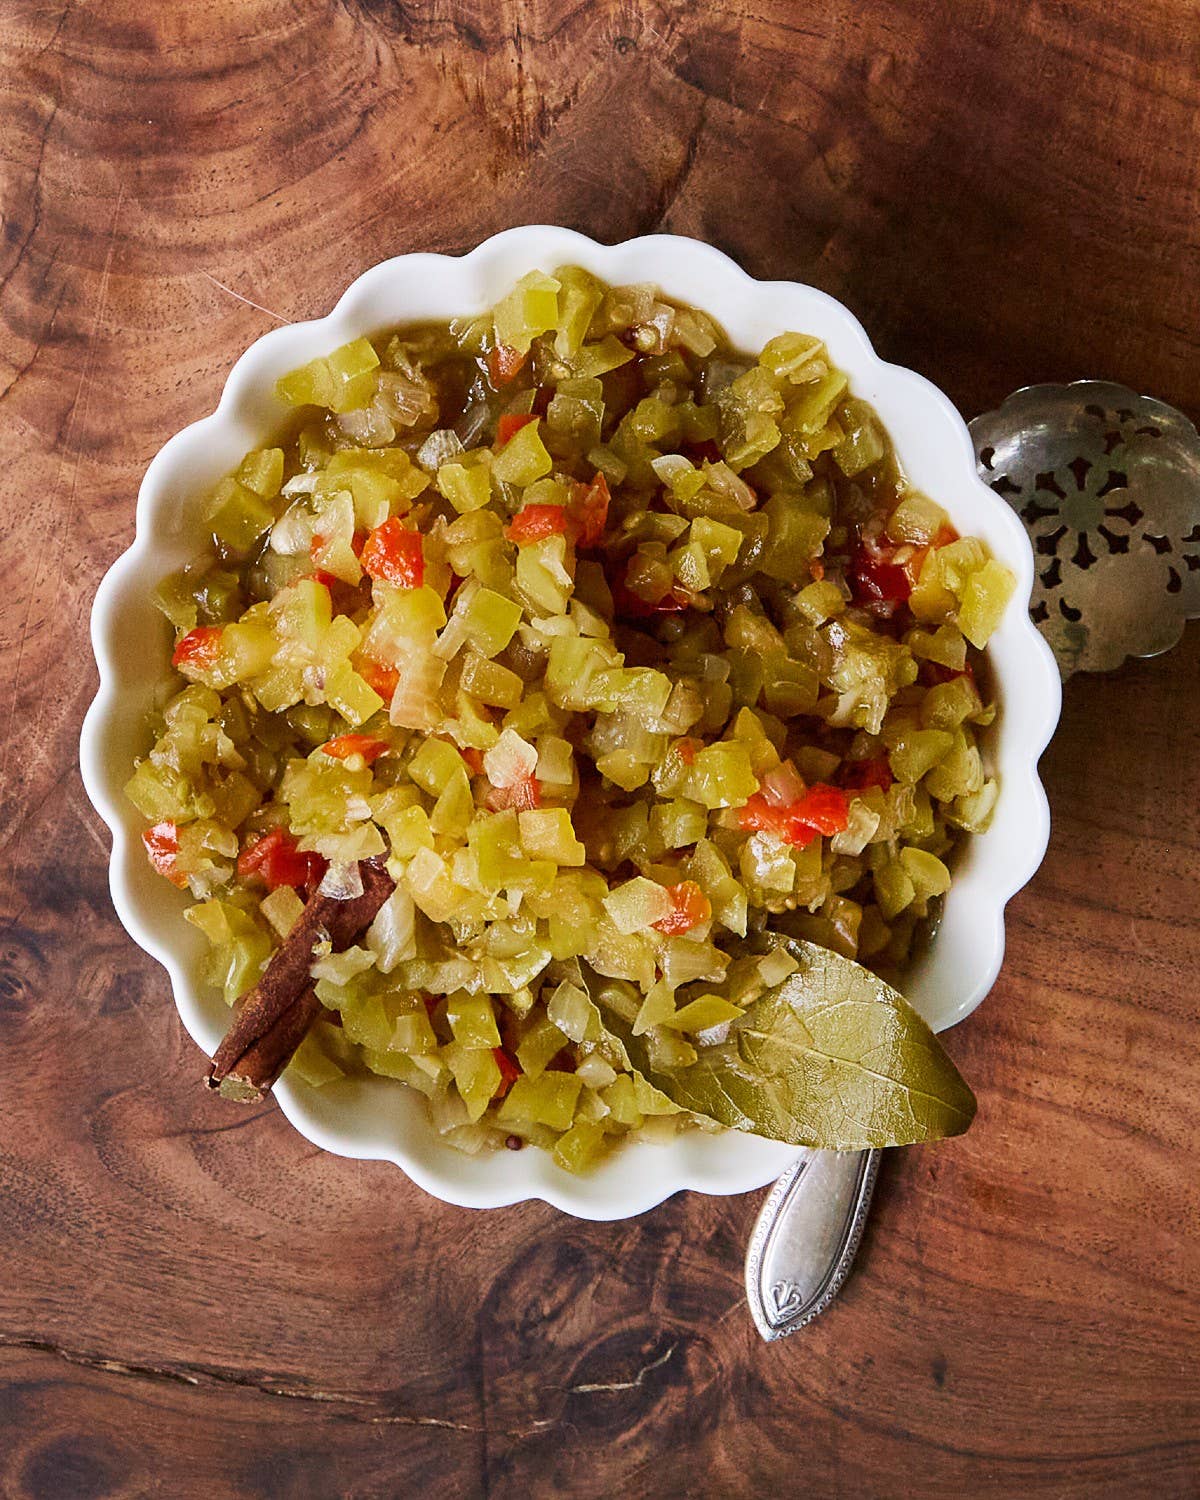 Green Tomato Chow Chow